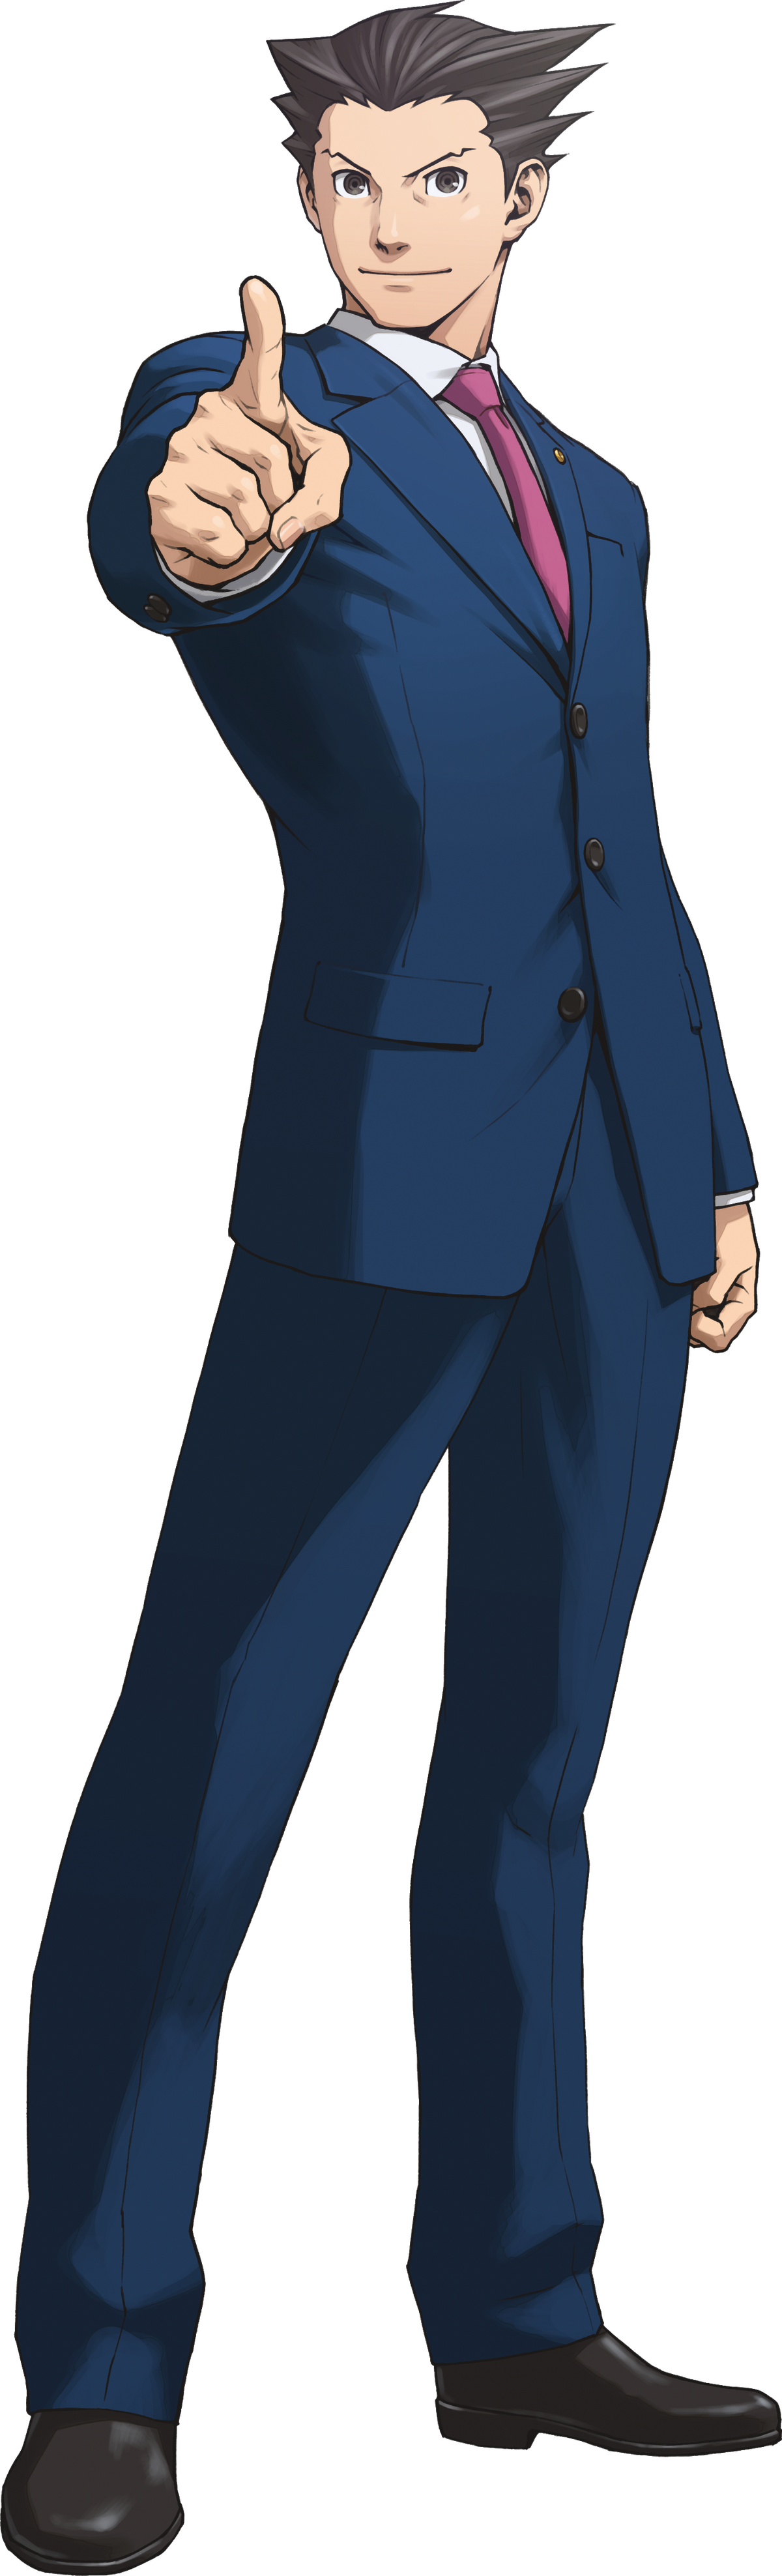 Godot Jove on X: ace attorney characters in order of how